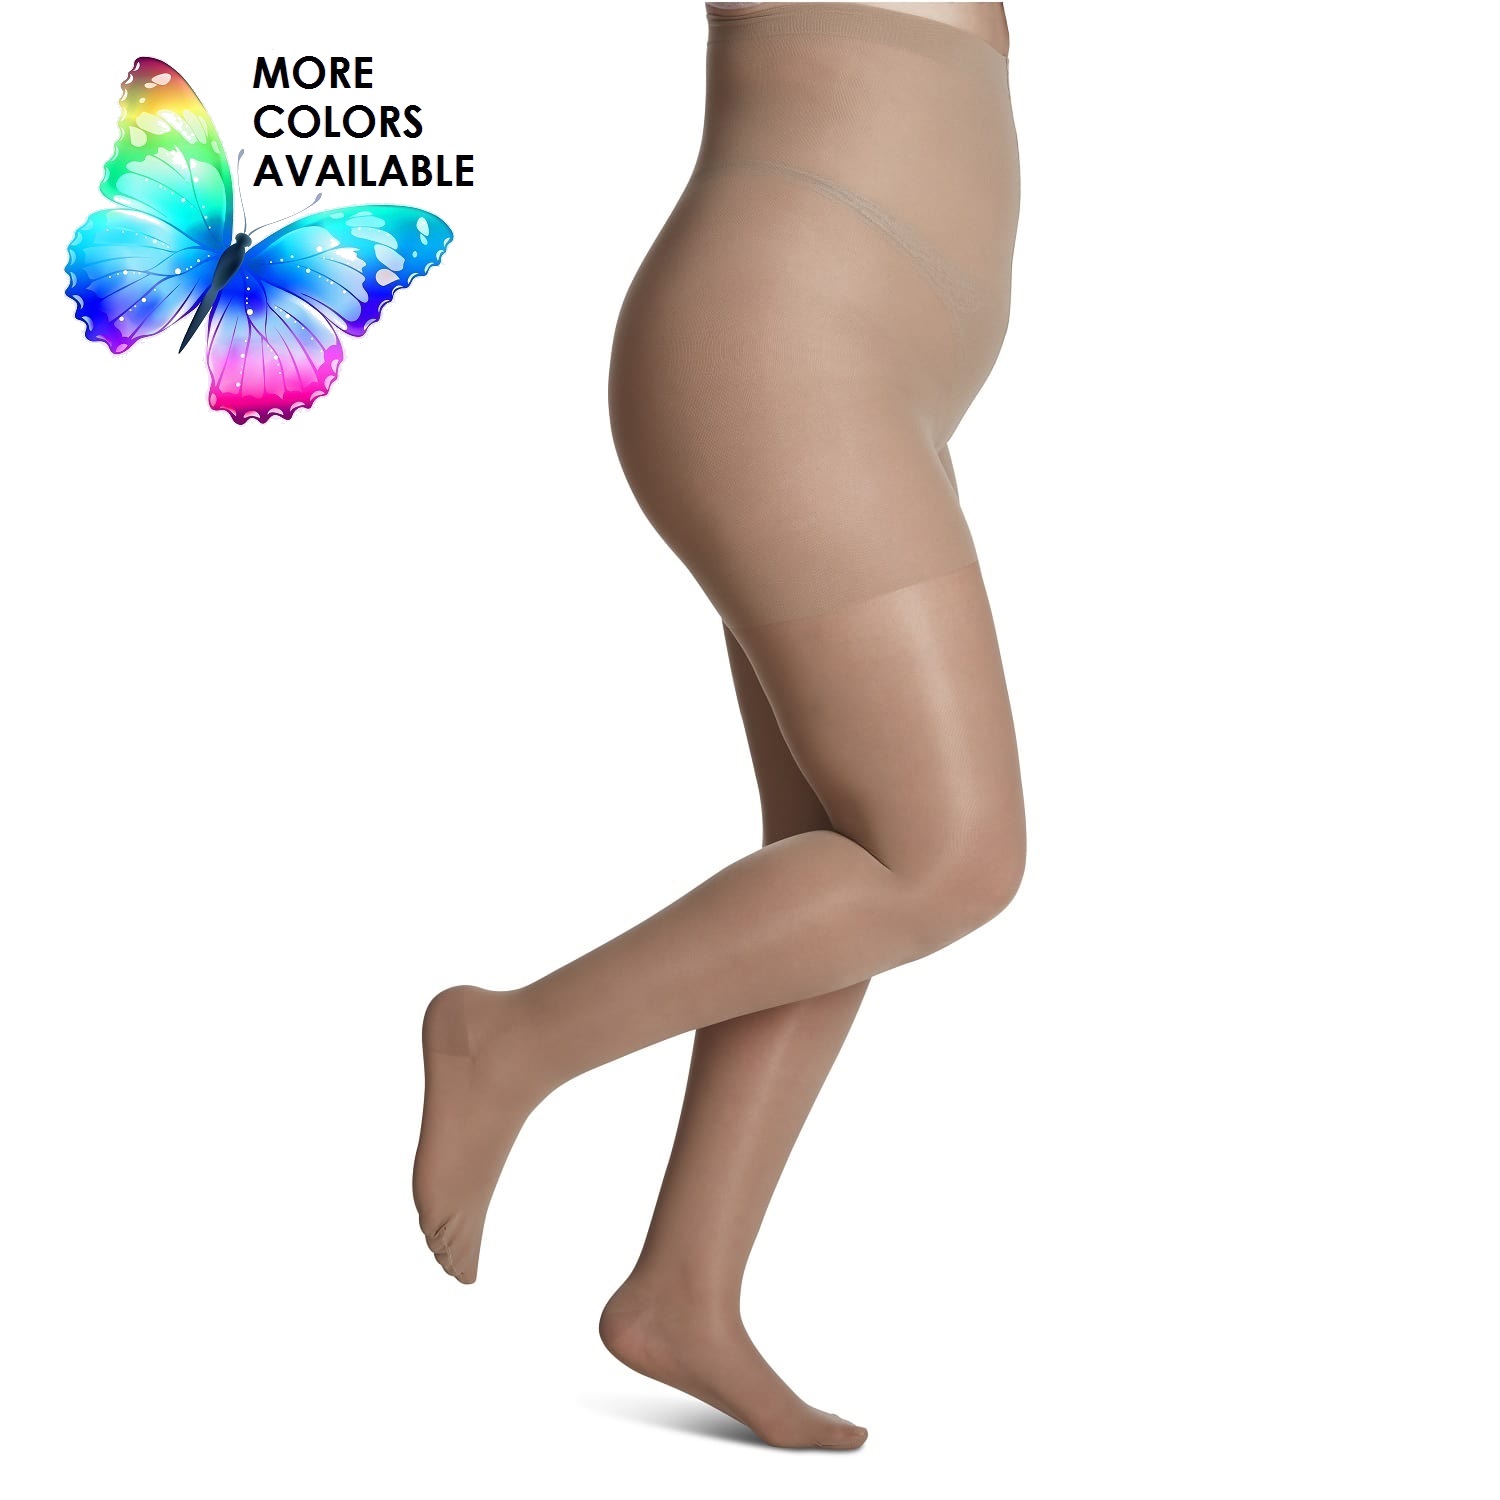 2 Size Down Compression Pantyhose Legs Shaper Pants Slimming Tights  Stockings